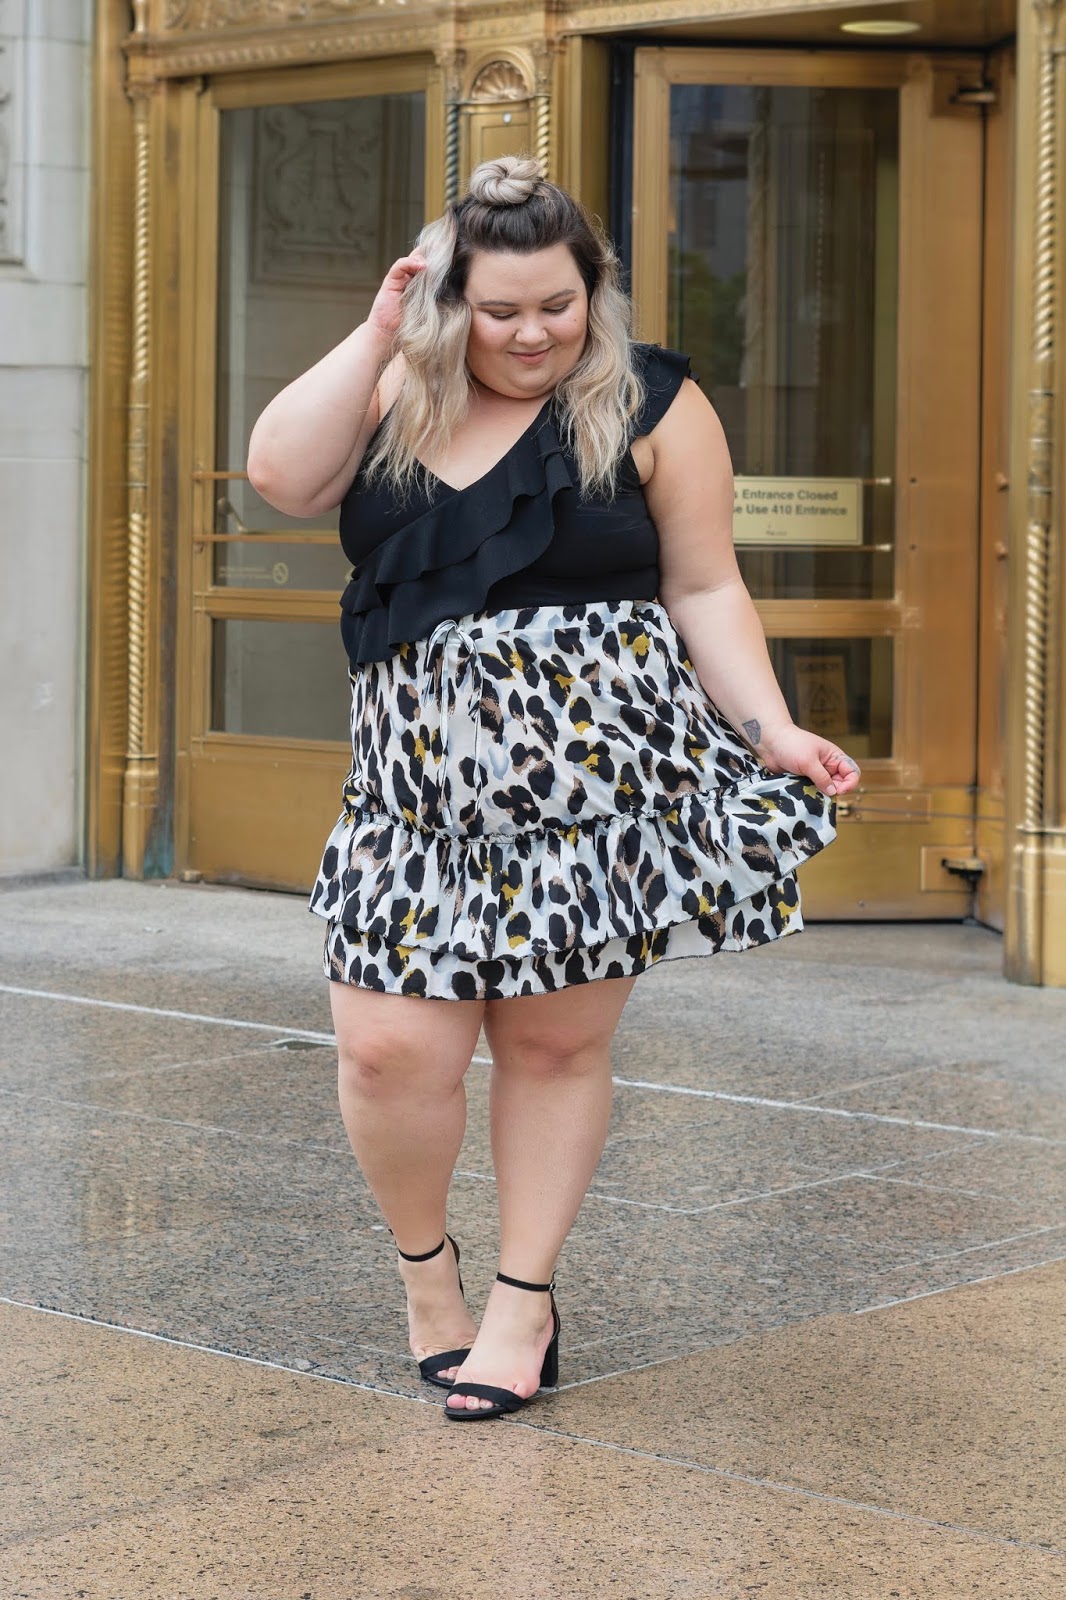 Chicago Plus Size Petite Fashion Blogger, influencer, YouTuber, and model Natalie Craig, of Natalie in the City, reviews SheIn's mini skirts and crop tops.